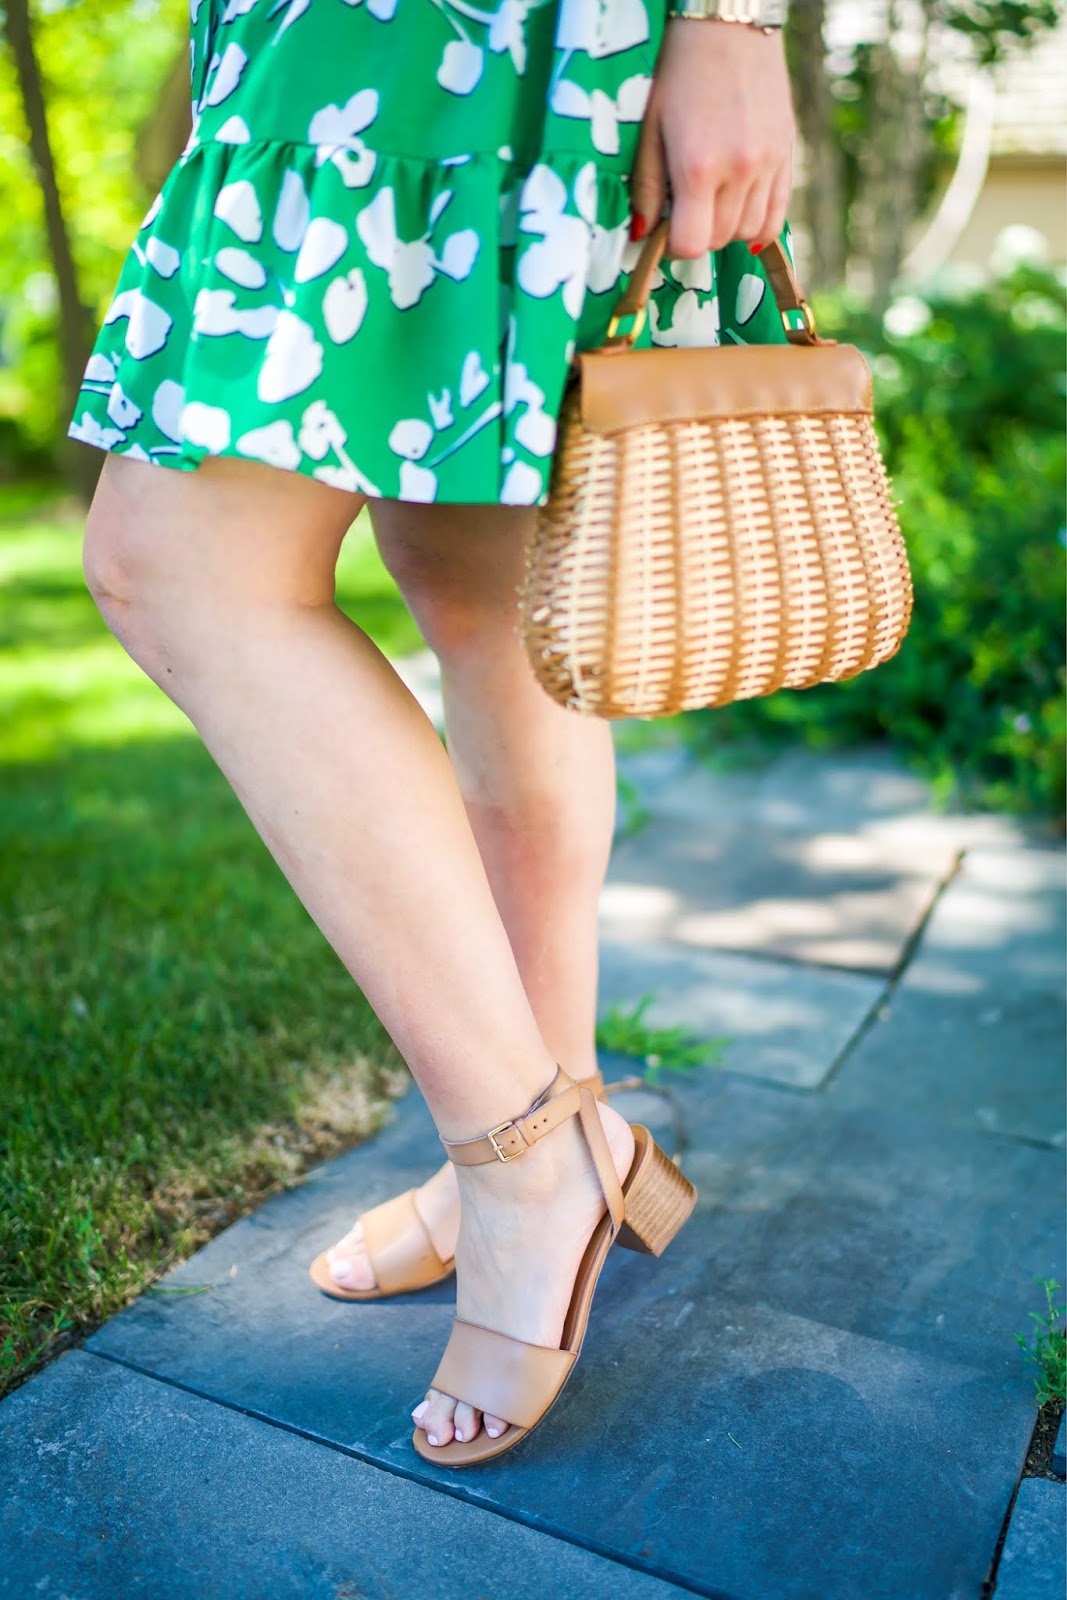 Eliza J Dress for Work featured by popular New York fashion blogger, Covering the Bases